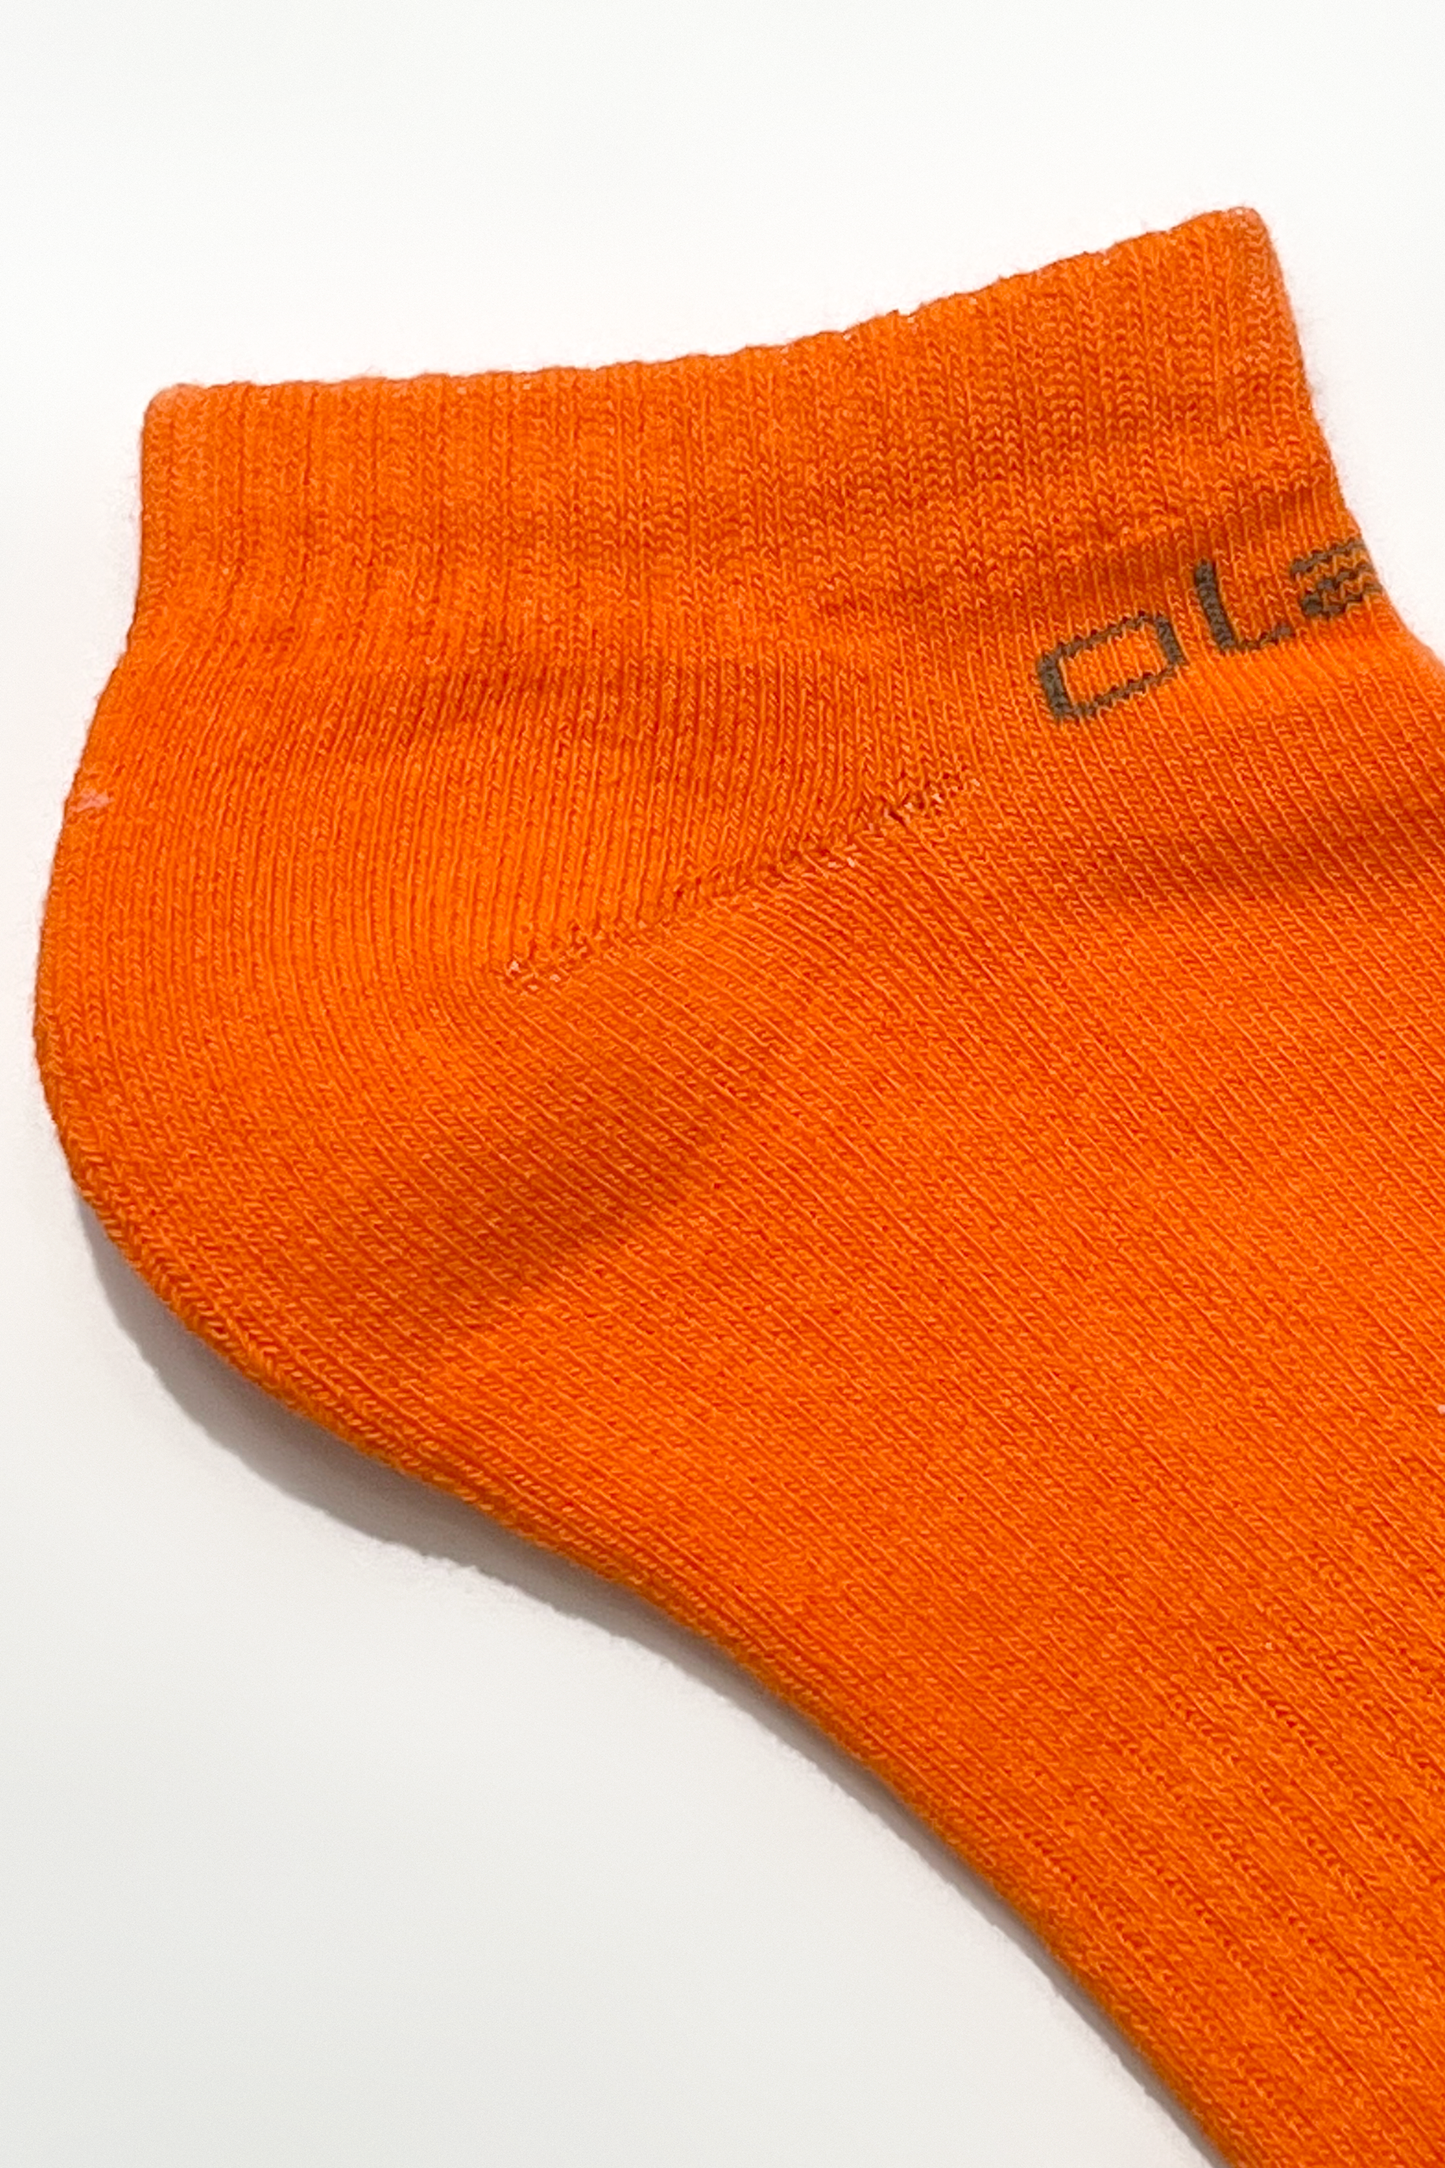 Colorful fall fantasy socks with a short kissy design in vibrant orange - OW-0152-USO-OR_5.